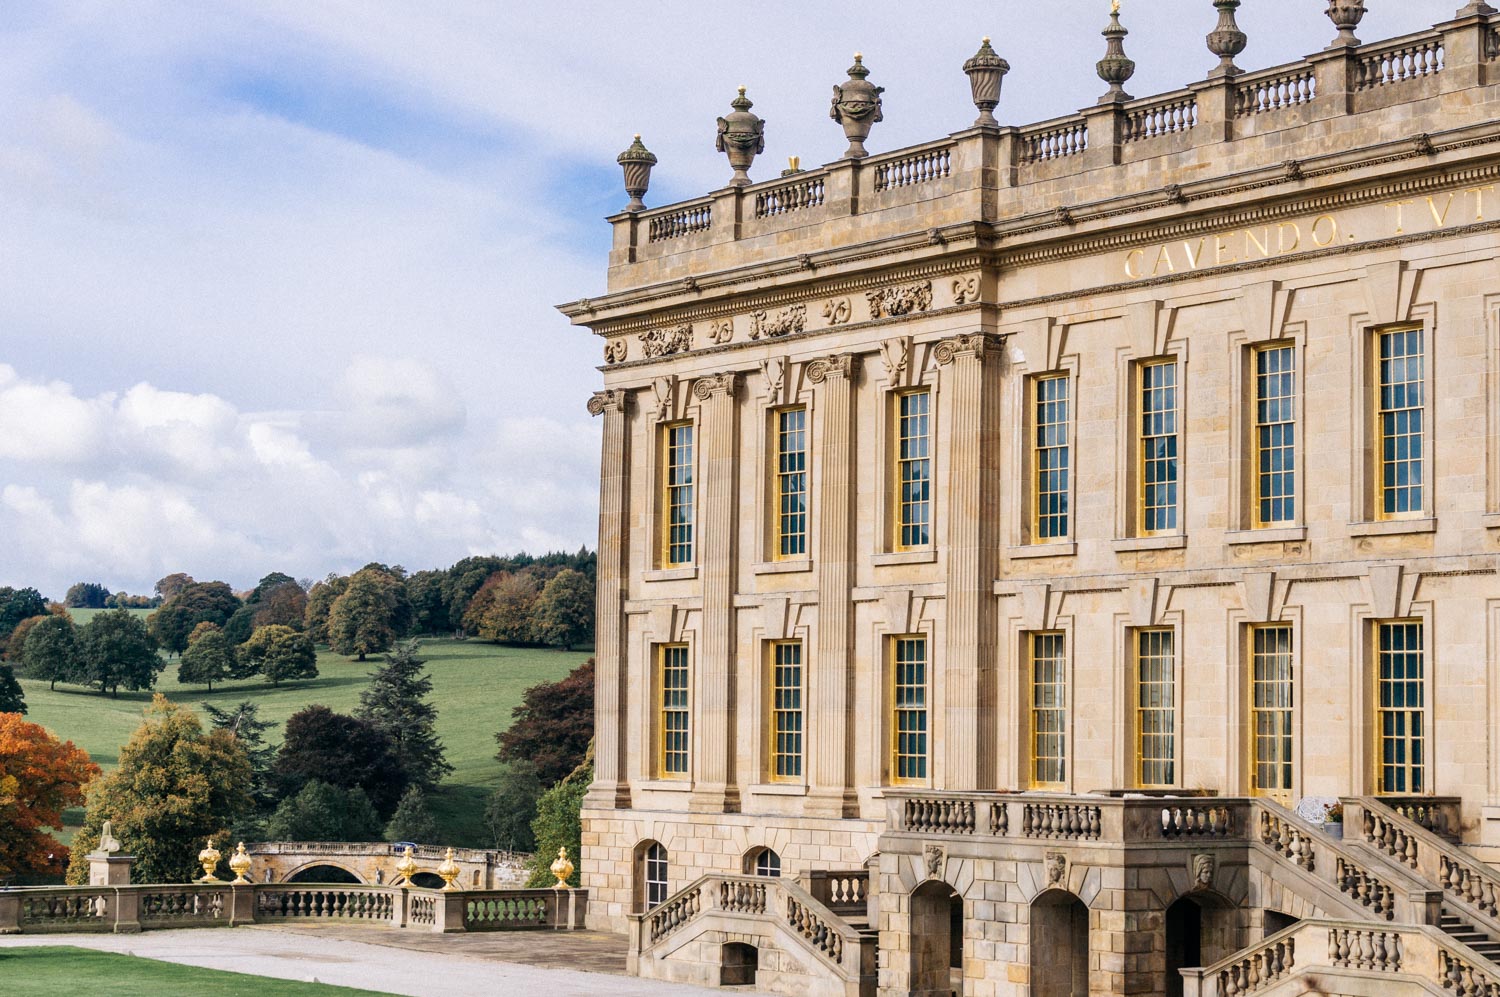 A long weekend road trip – Chatsworth House Gardens